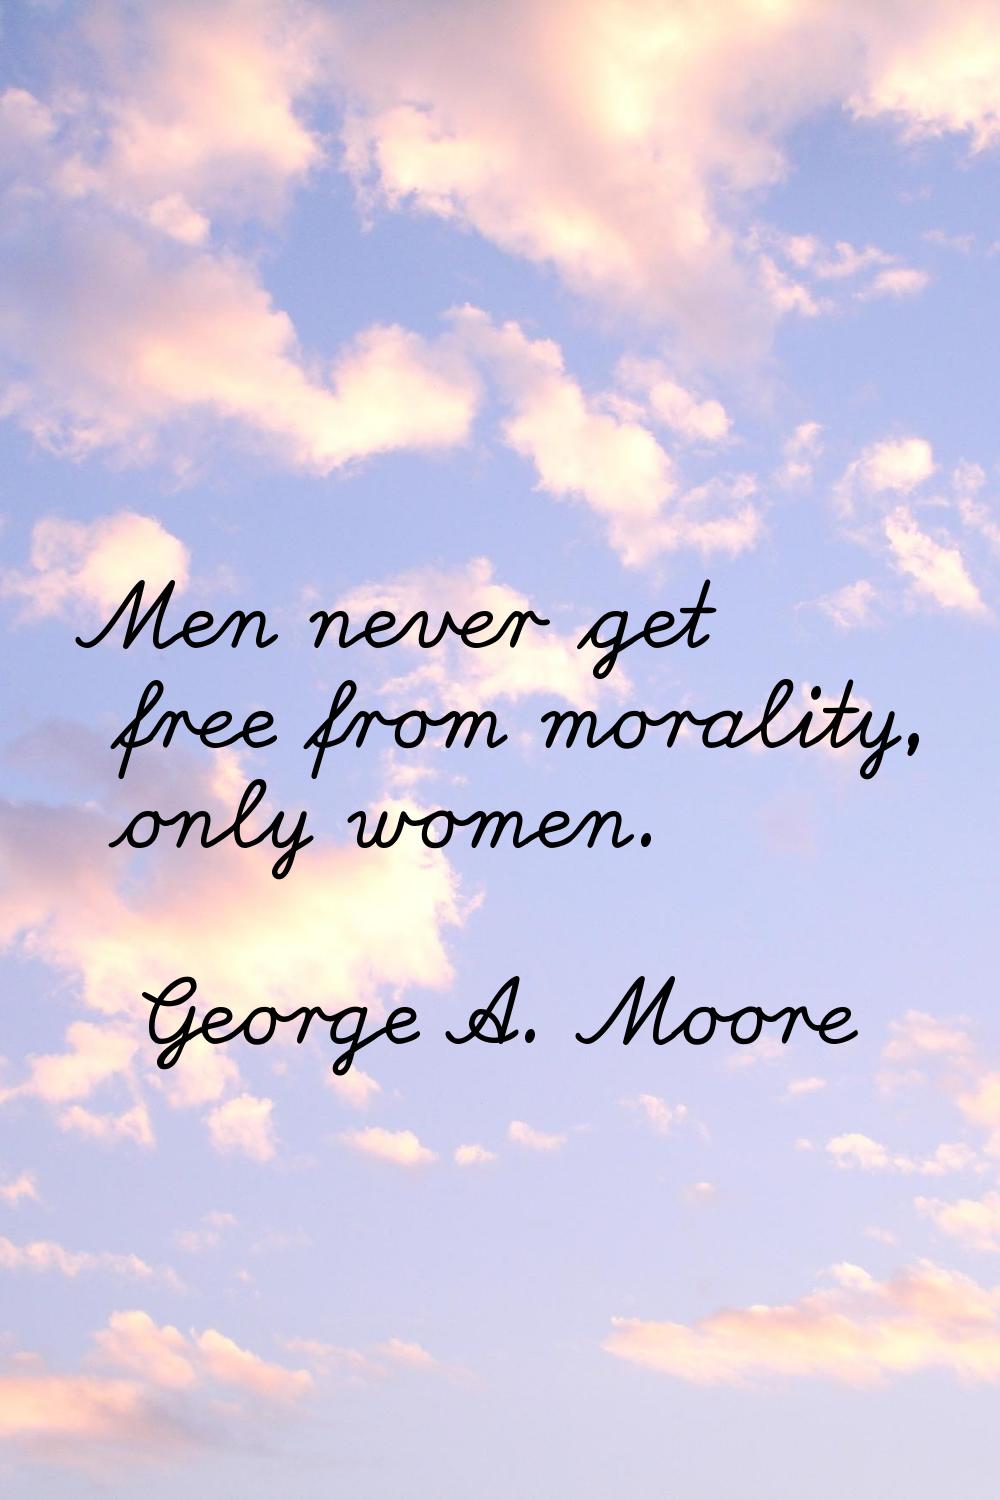 Men never get free from morality, only women.